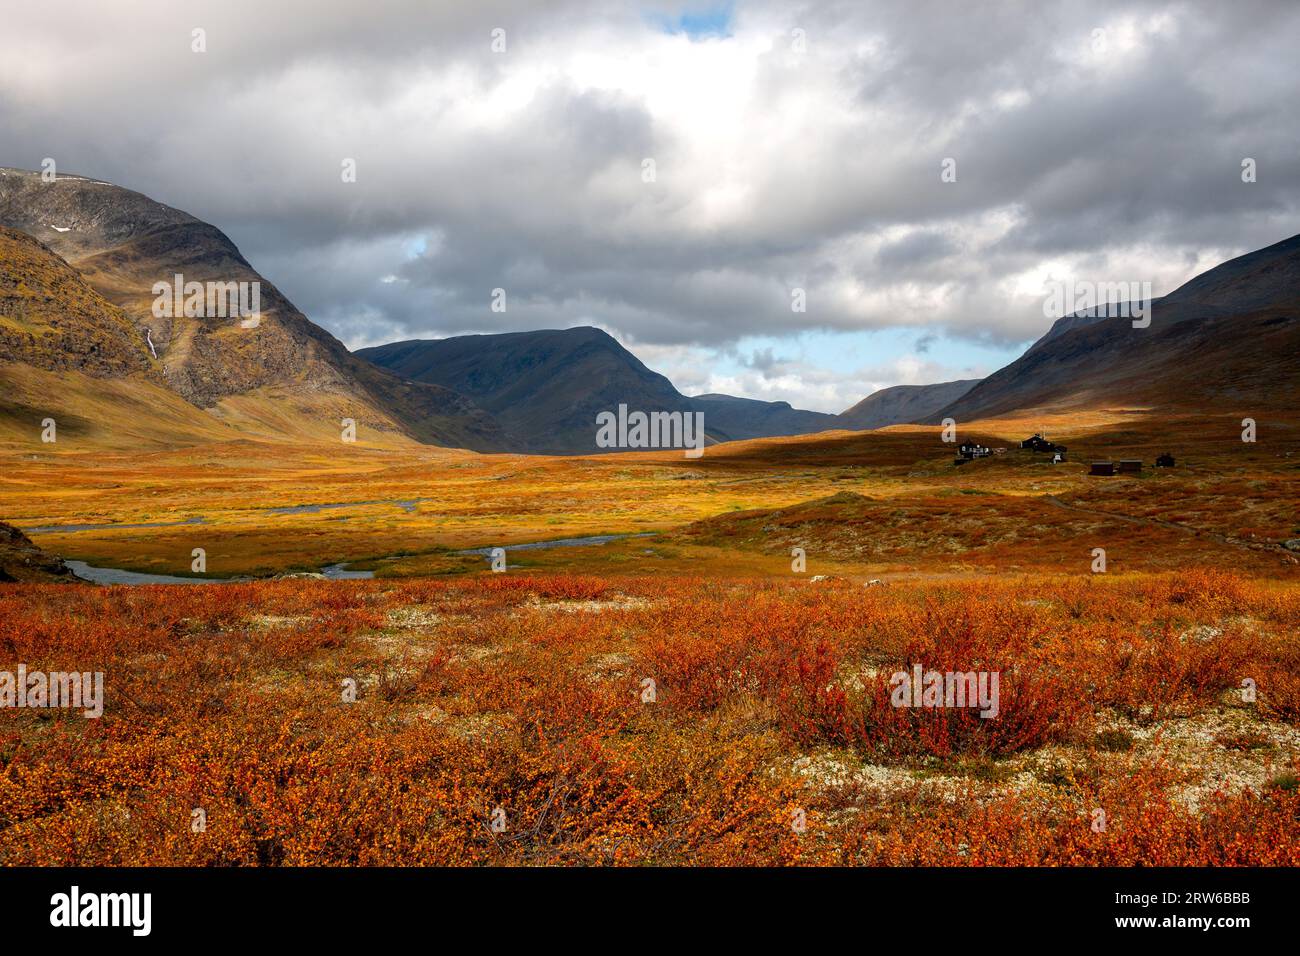 Mountains around Salka Mountain Hut on Kungsleden hiking trail in early September, Lapland, Sweden Stock Photo